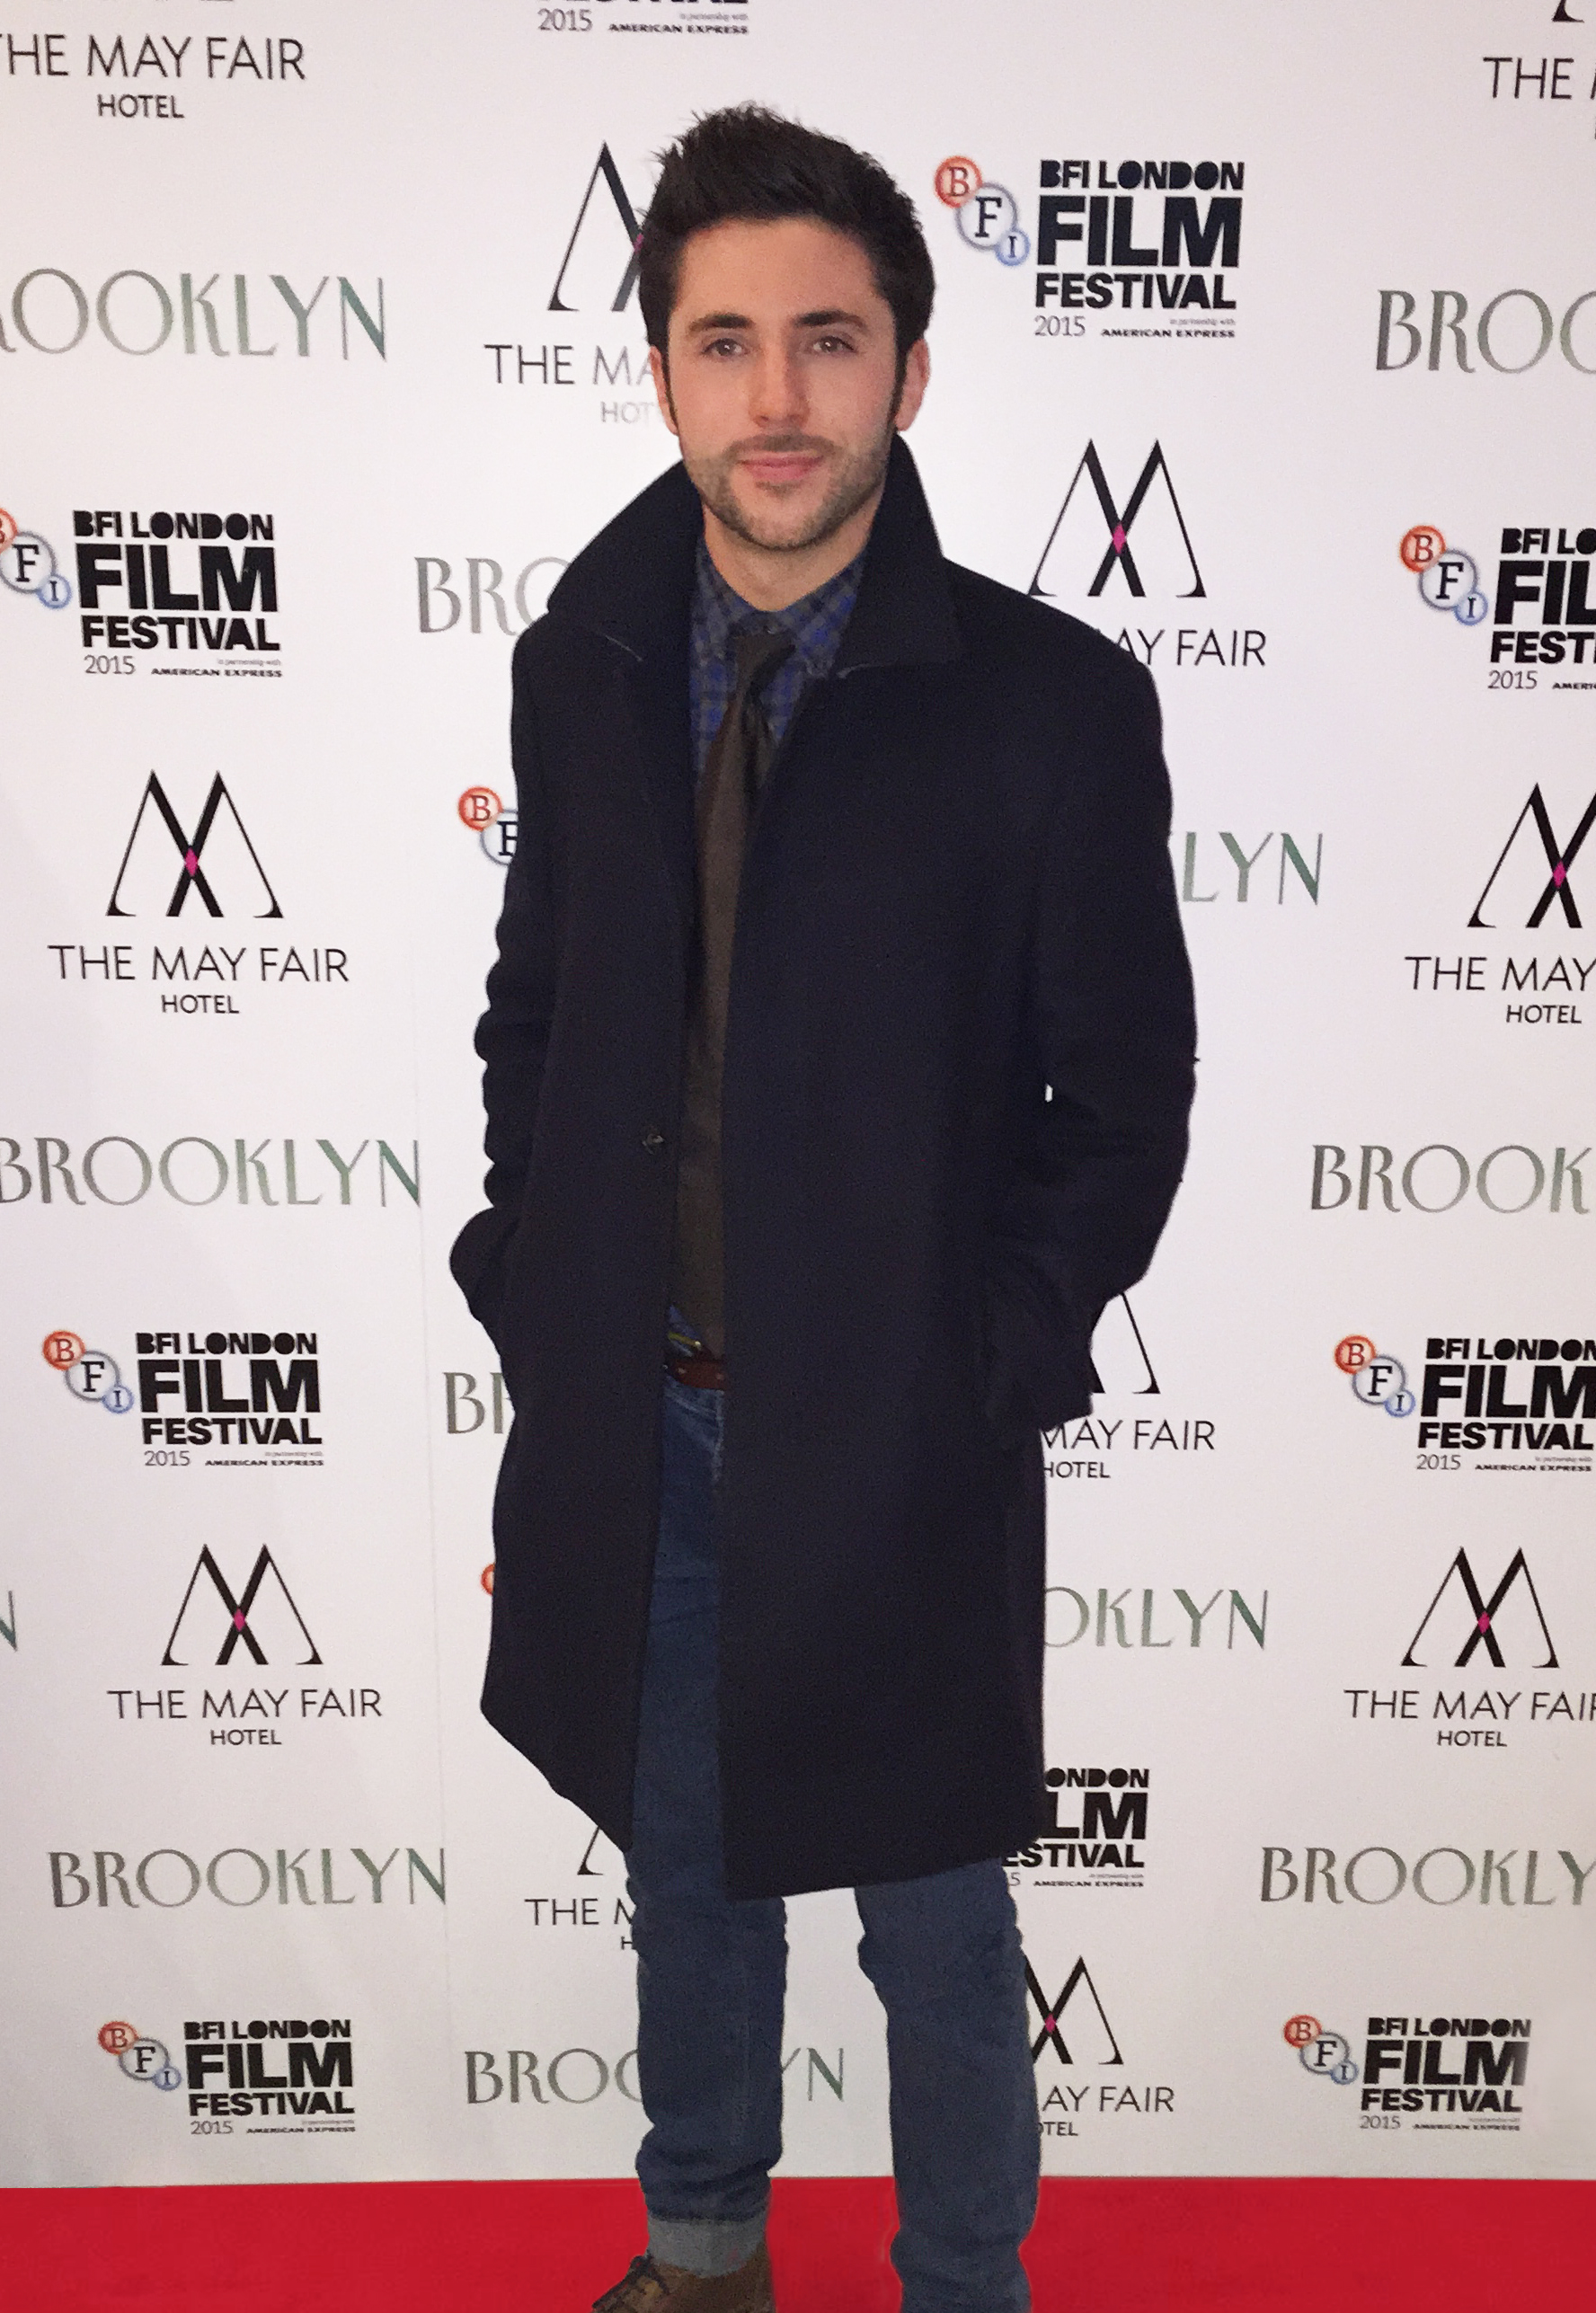 Premiere of Brooklyn, Leicester Square 2015